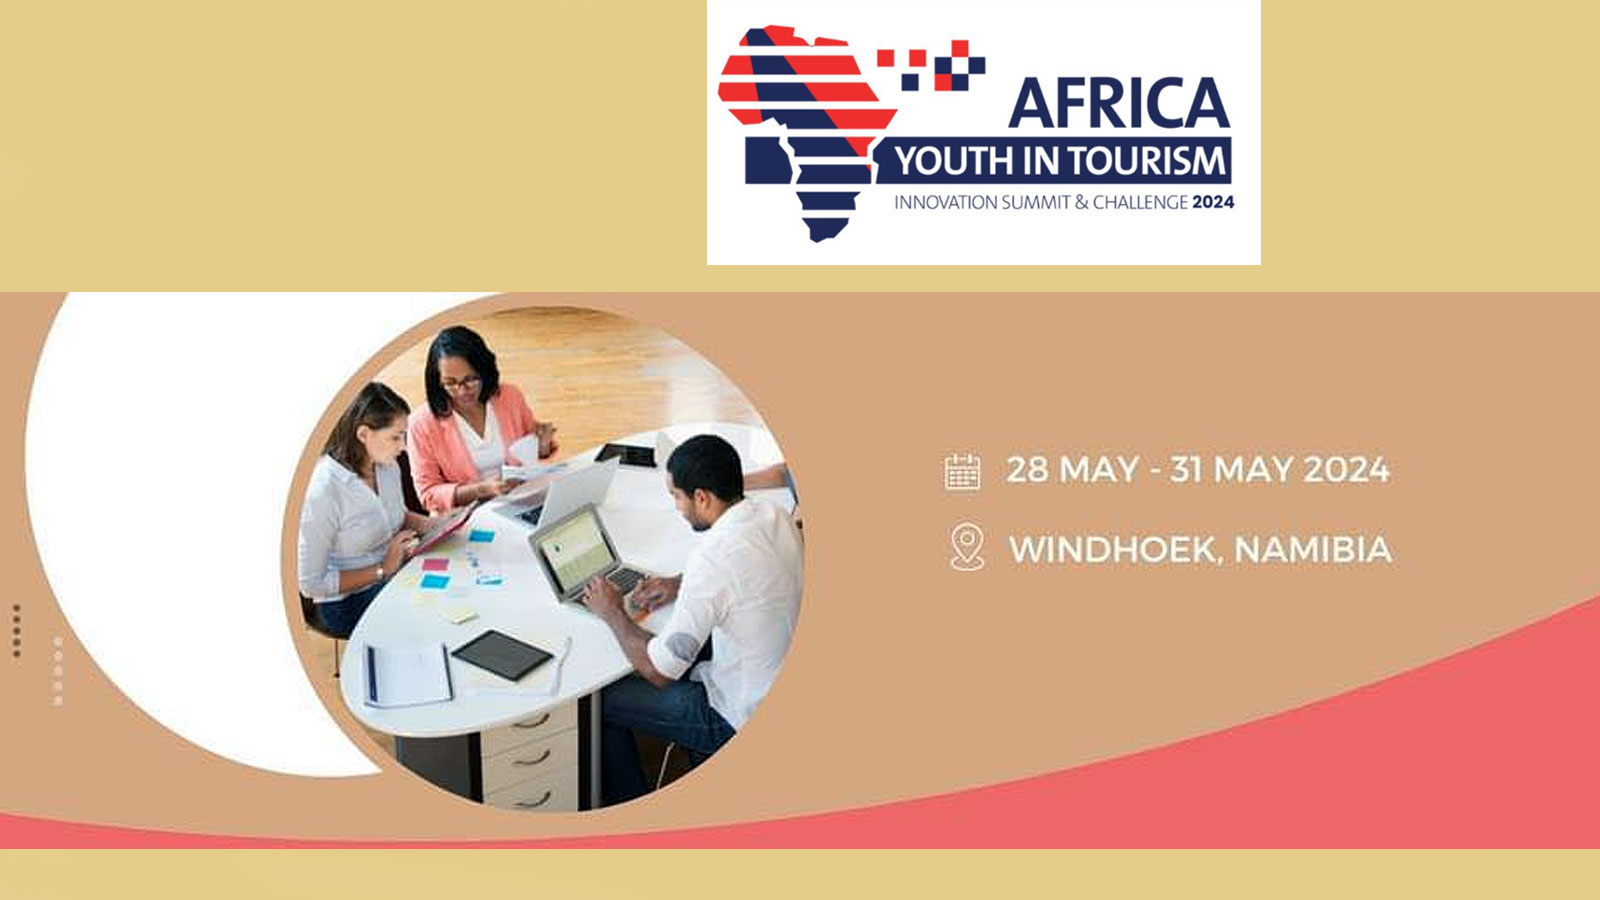 Hilton Windhoek joins 2024 Africa Youth in Tourism Innovation Summit International partners